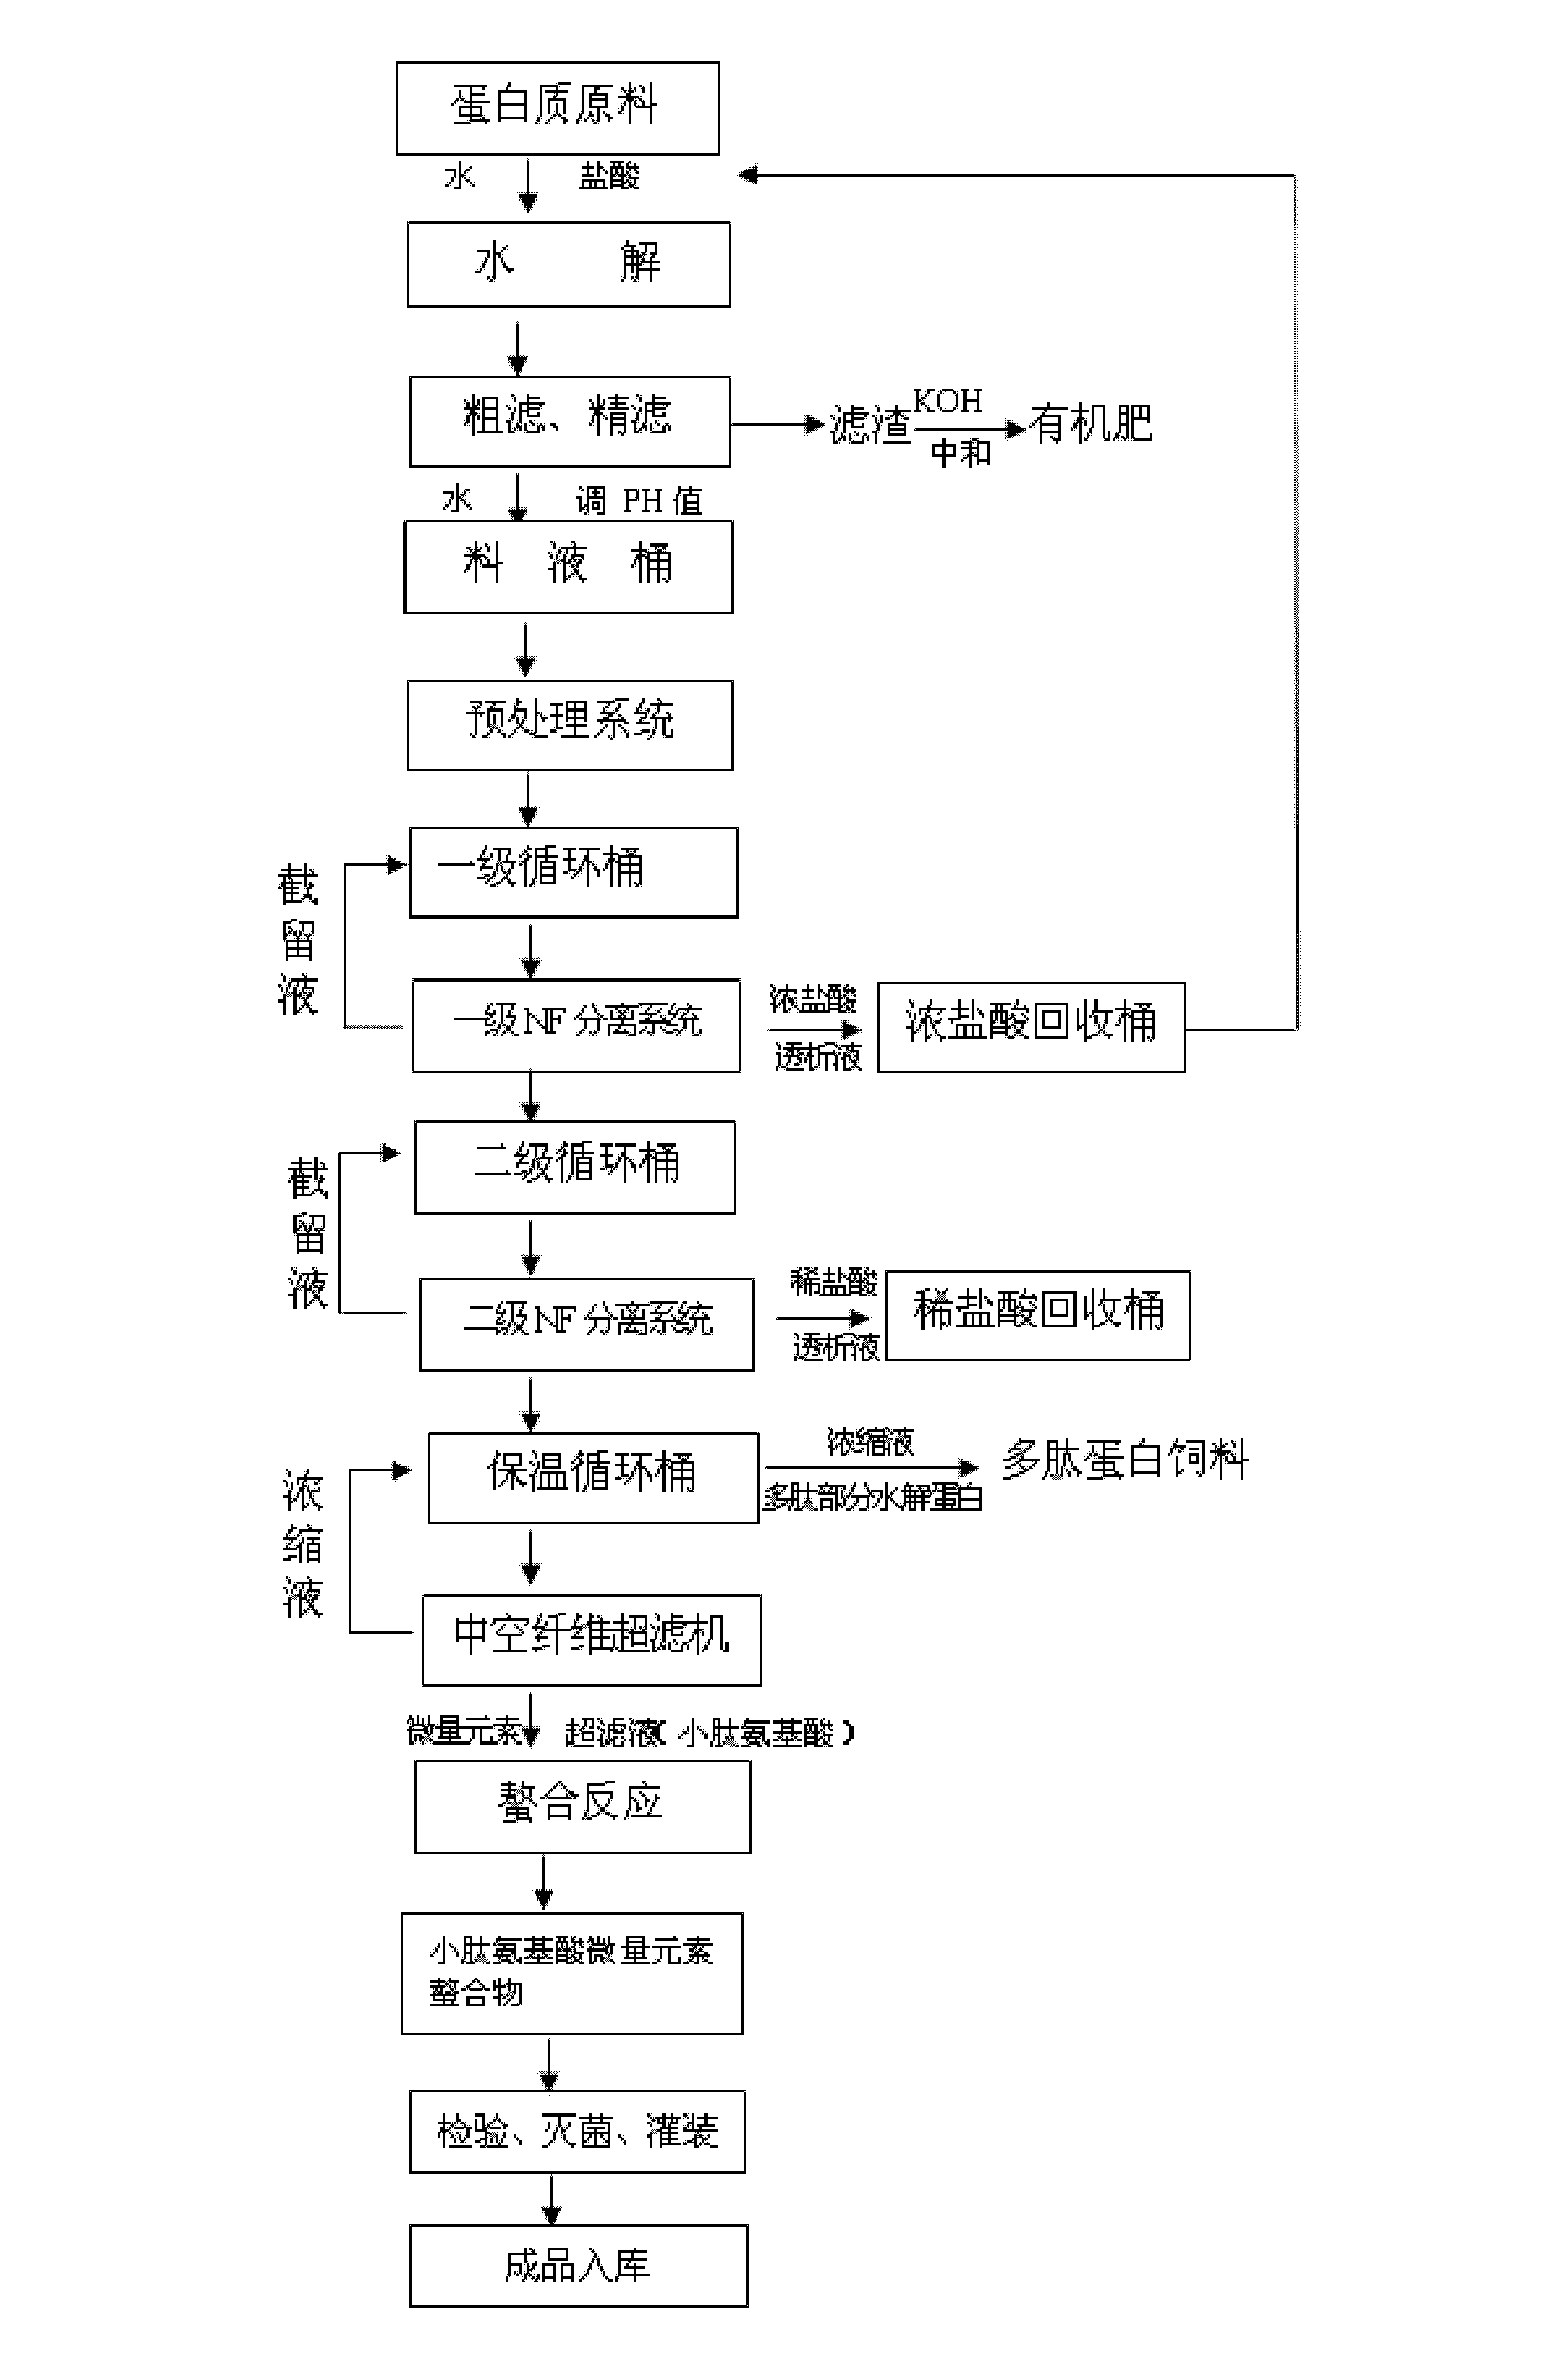 Method for producing small peptide amino acid microelement chelate by way of acid hydrolysis of protein